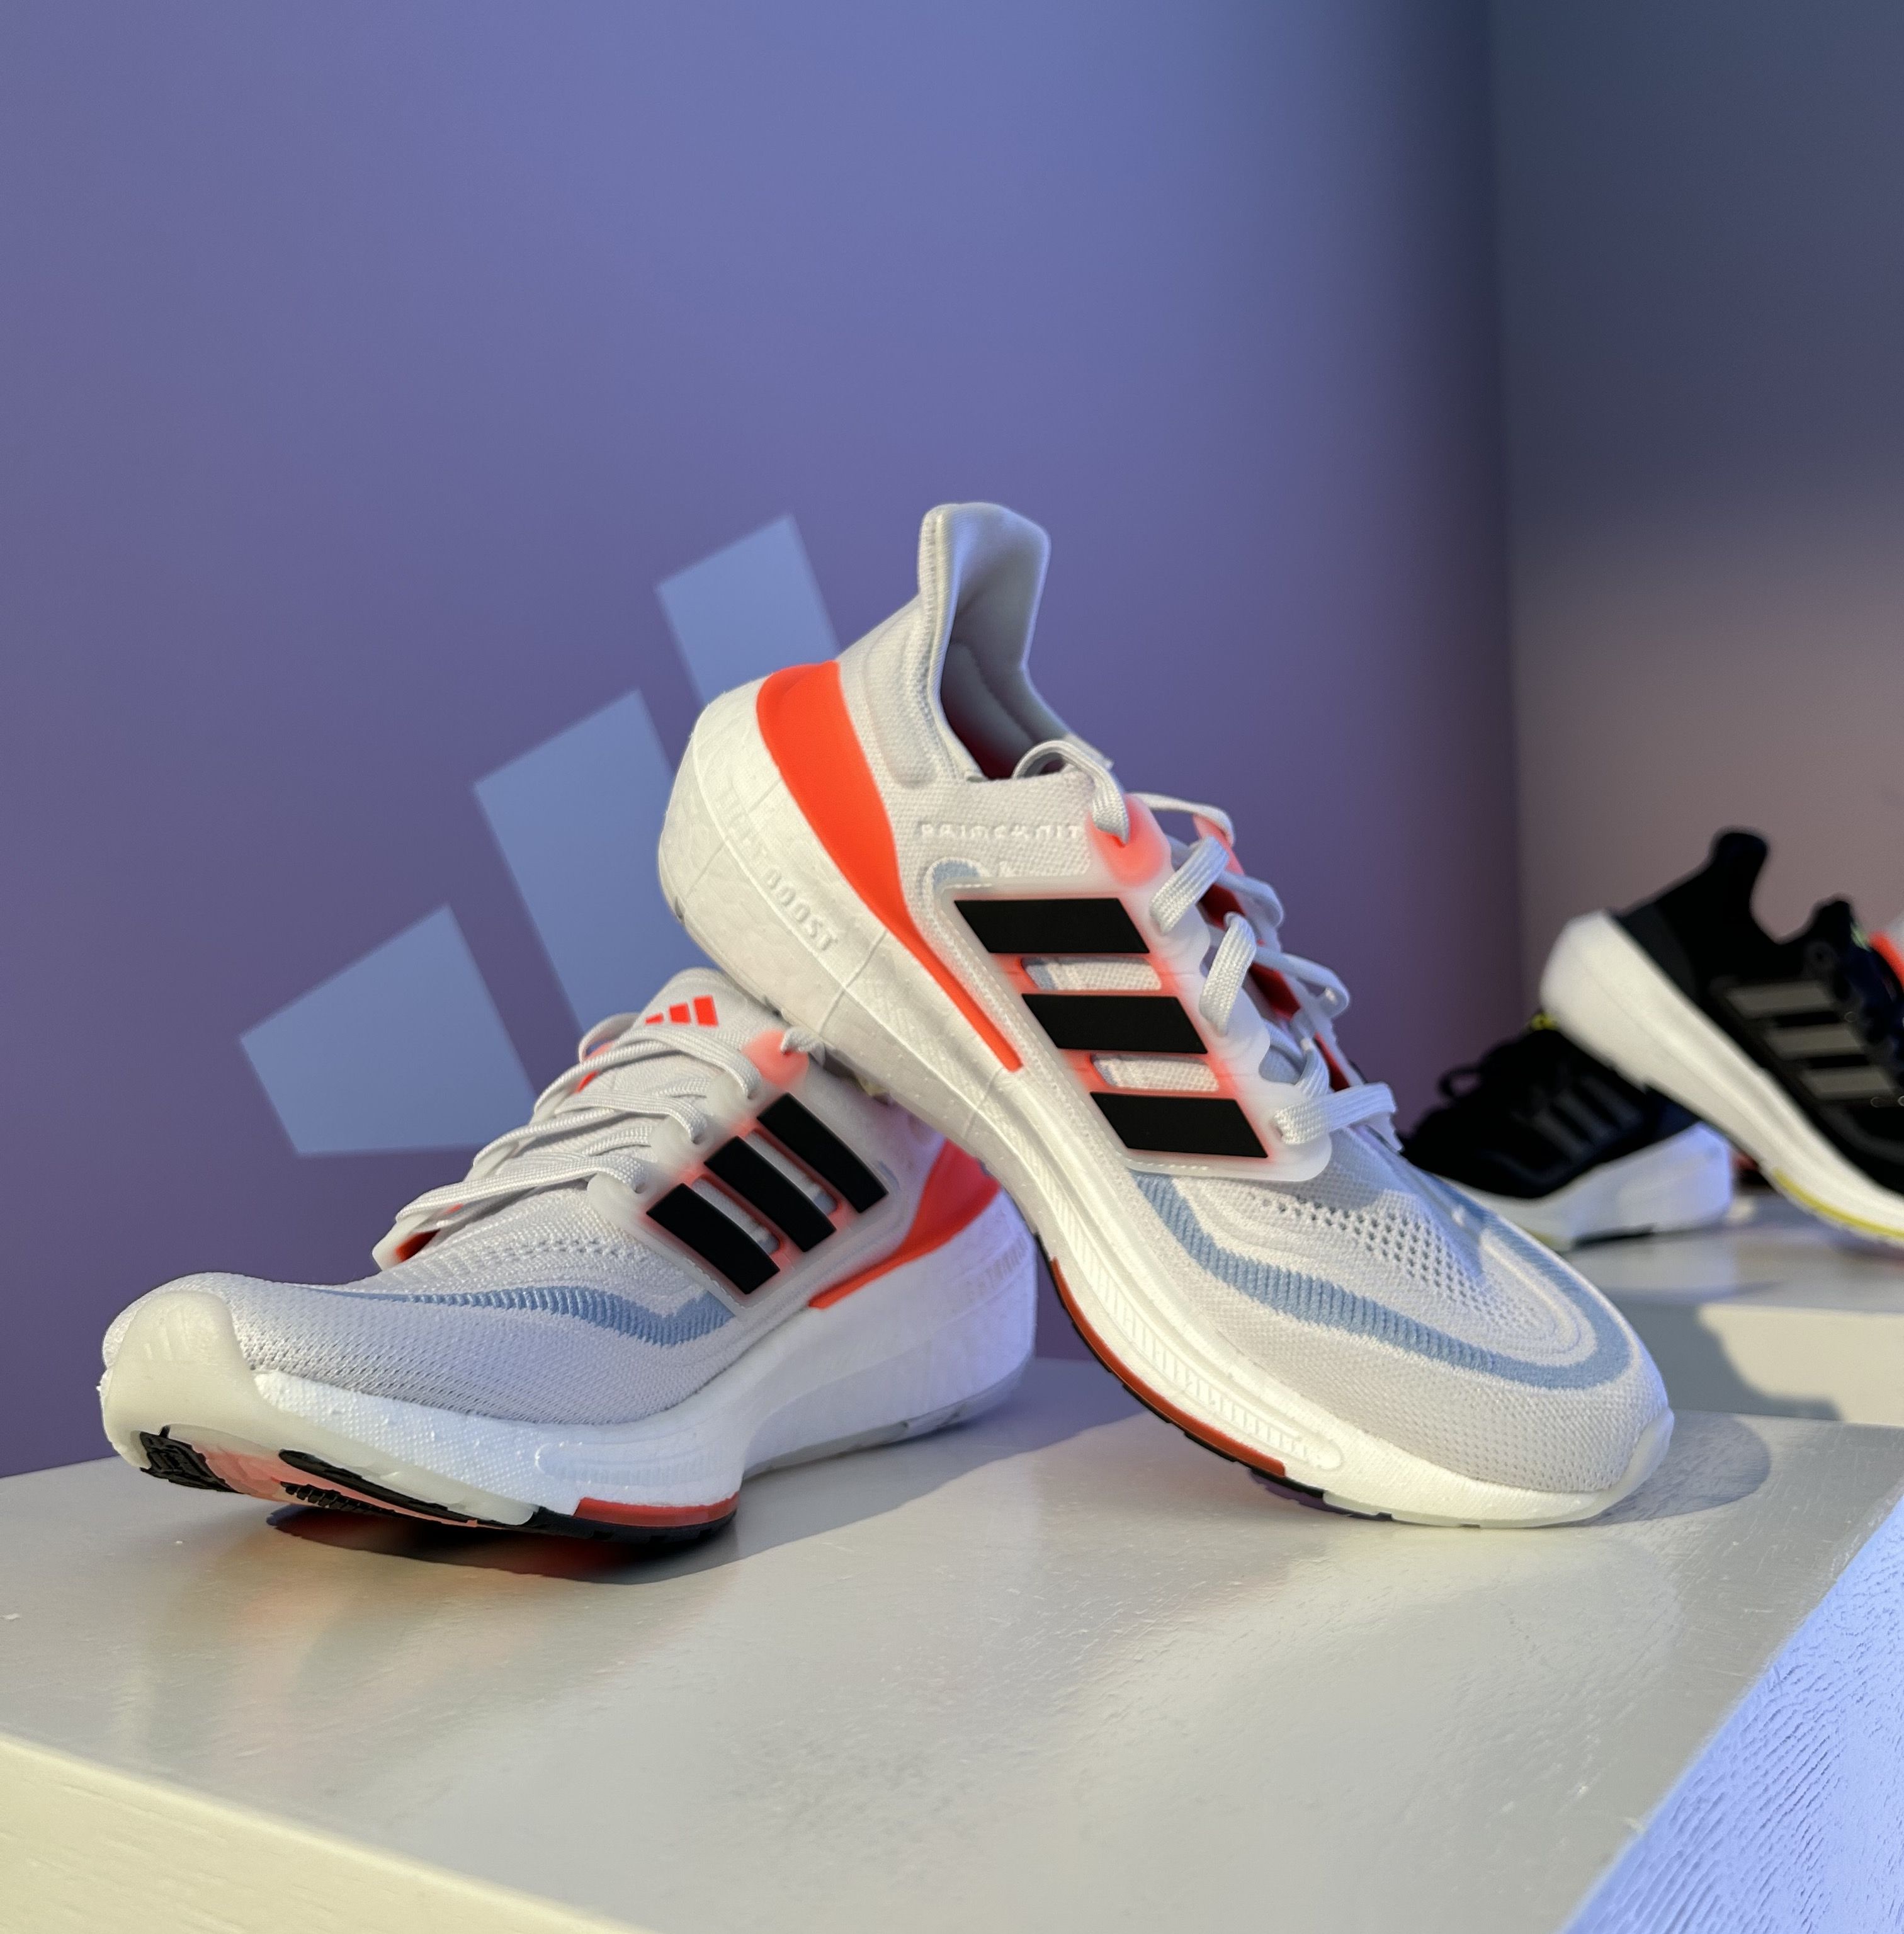 Adidas Light: Tried and tested